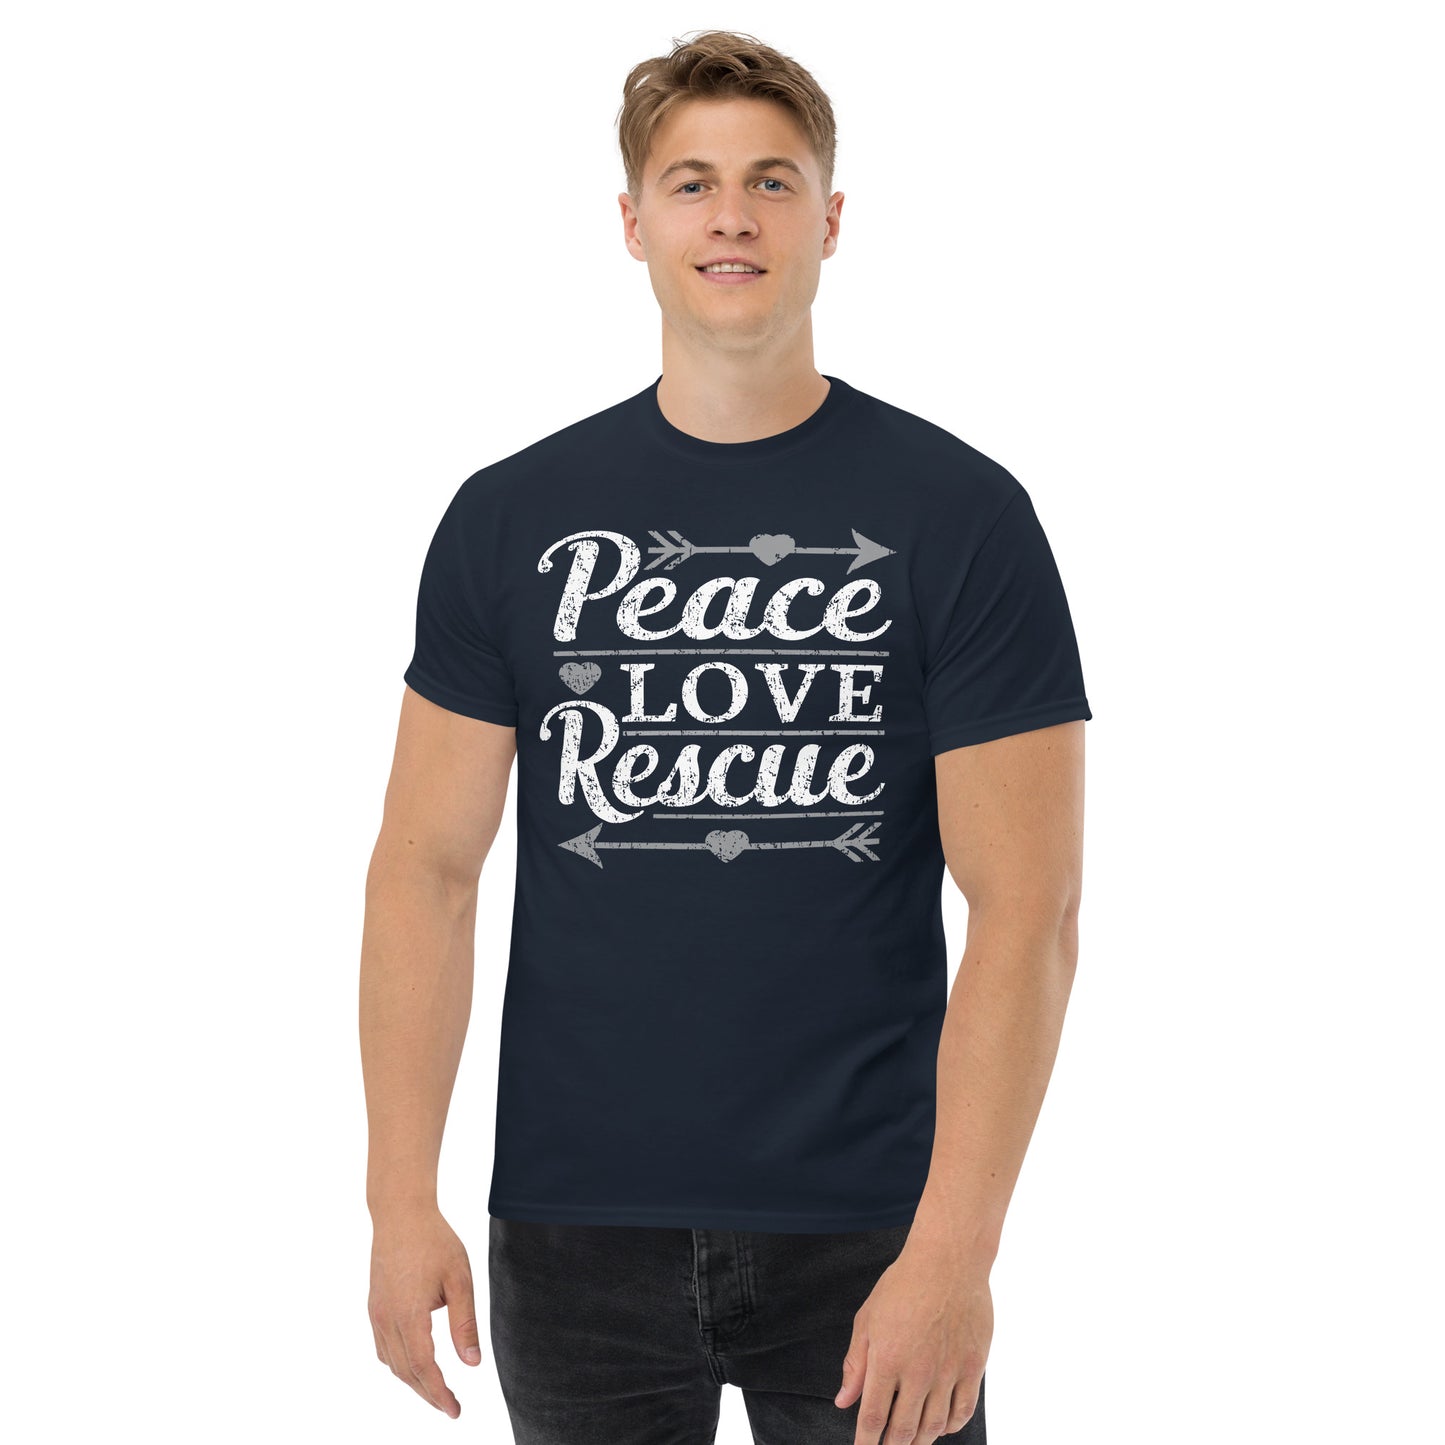 Peace love rescue men’s t-shirts by Dog Artistry navy color